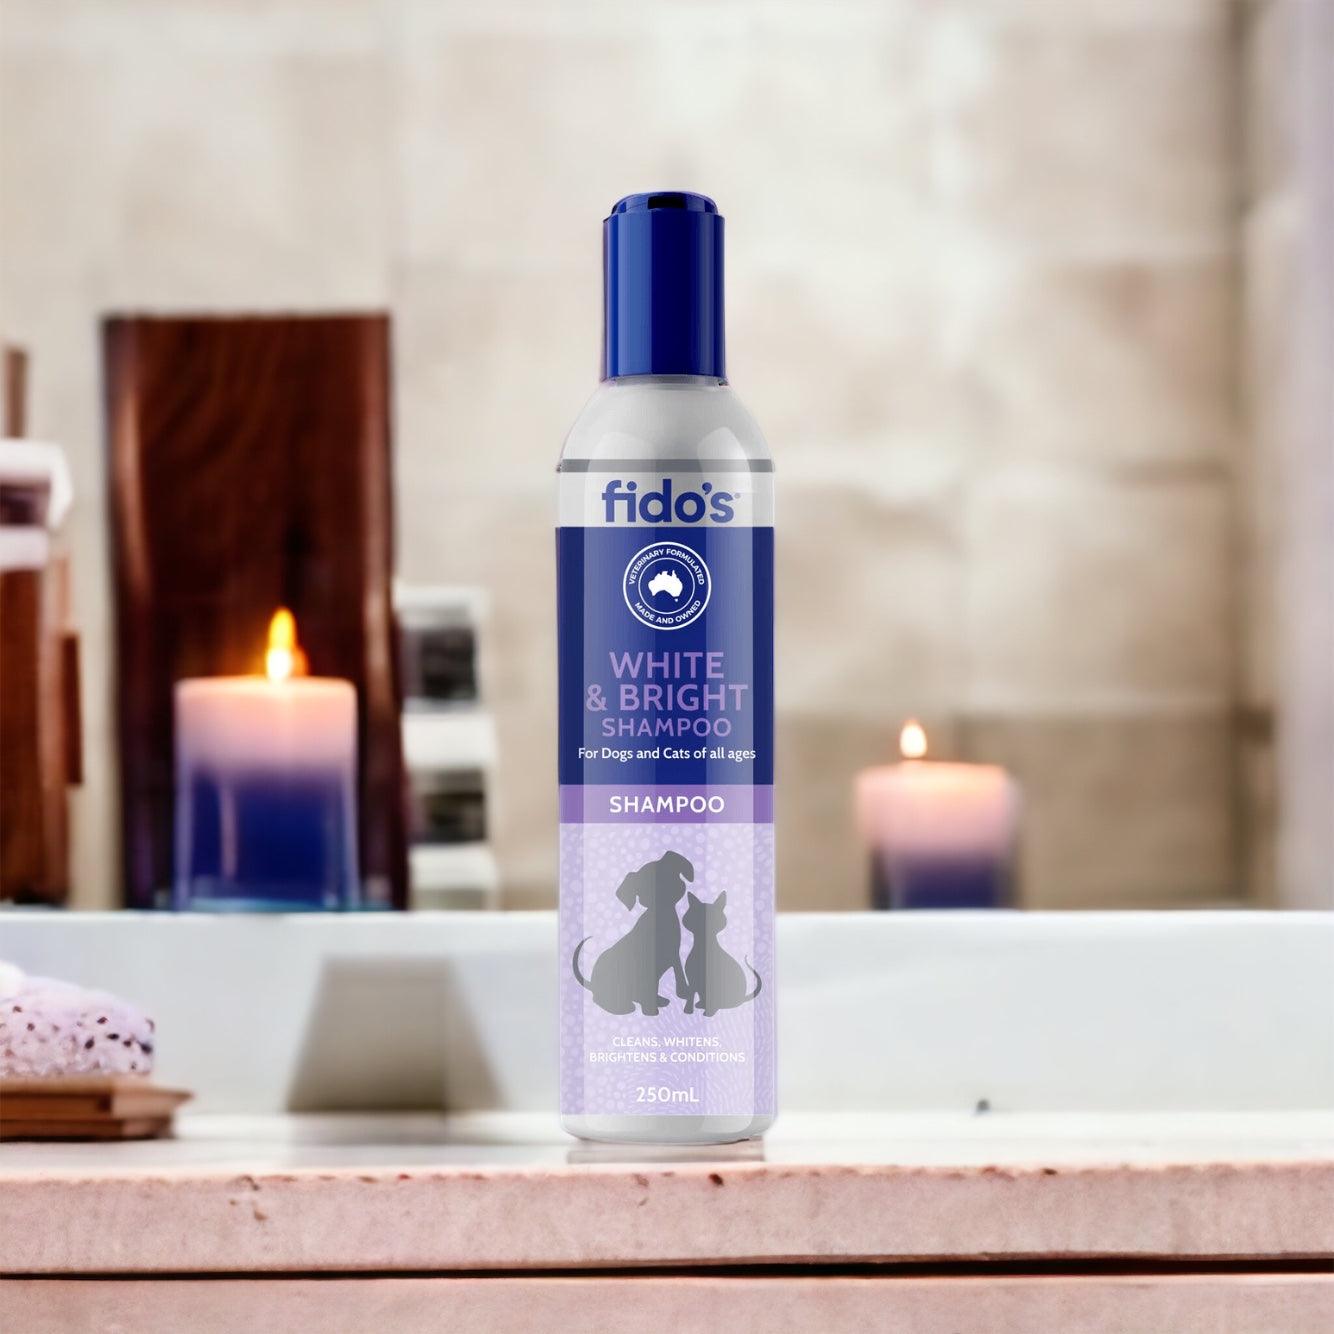 Fidos White and Bright Shampoo 250ml - Enhance Your Pet's Coat with a Gentle, Effective Formula - PAWS CLUB